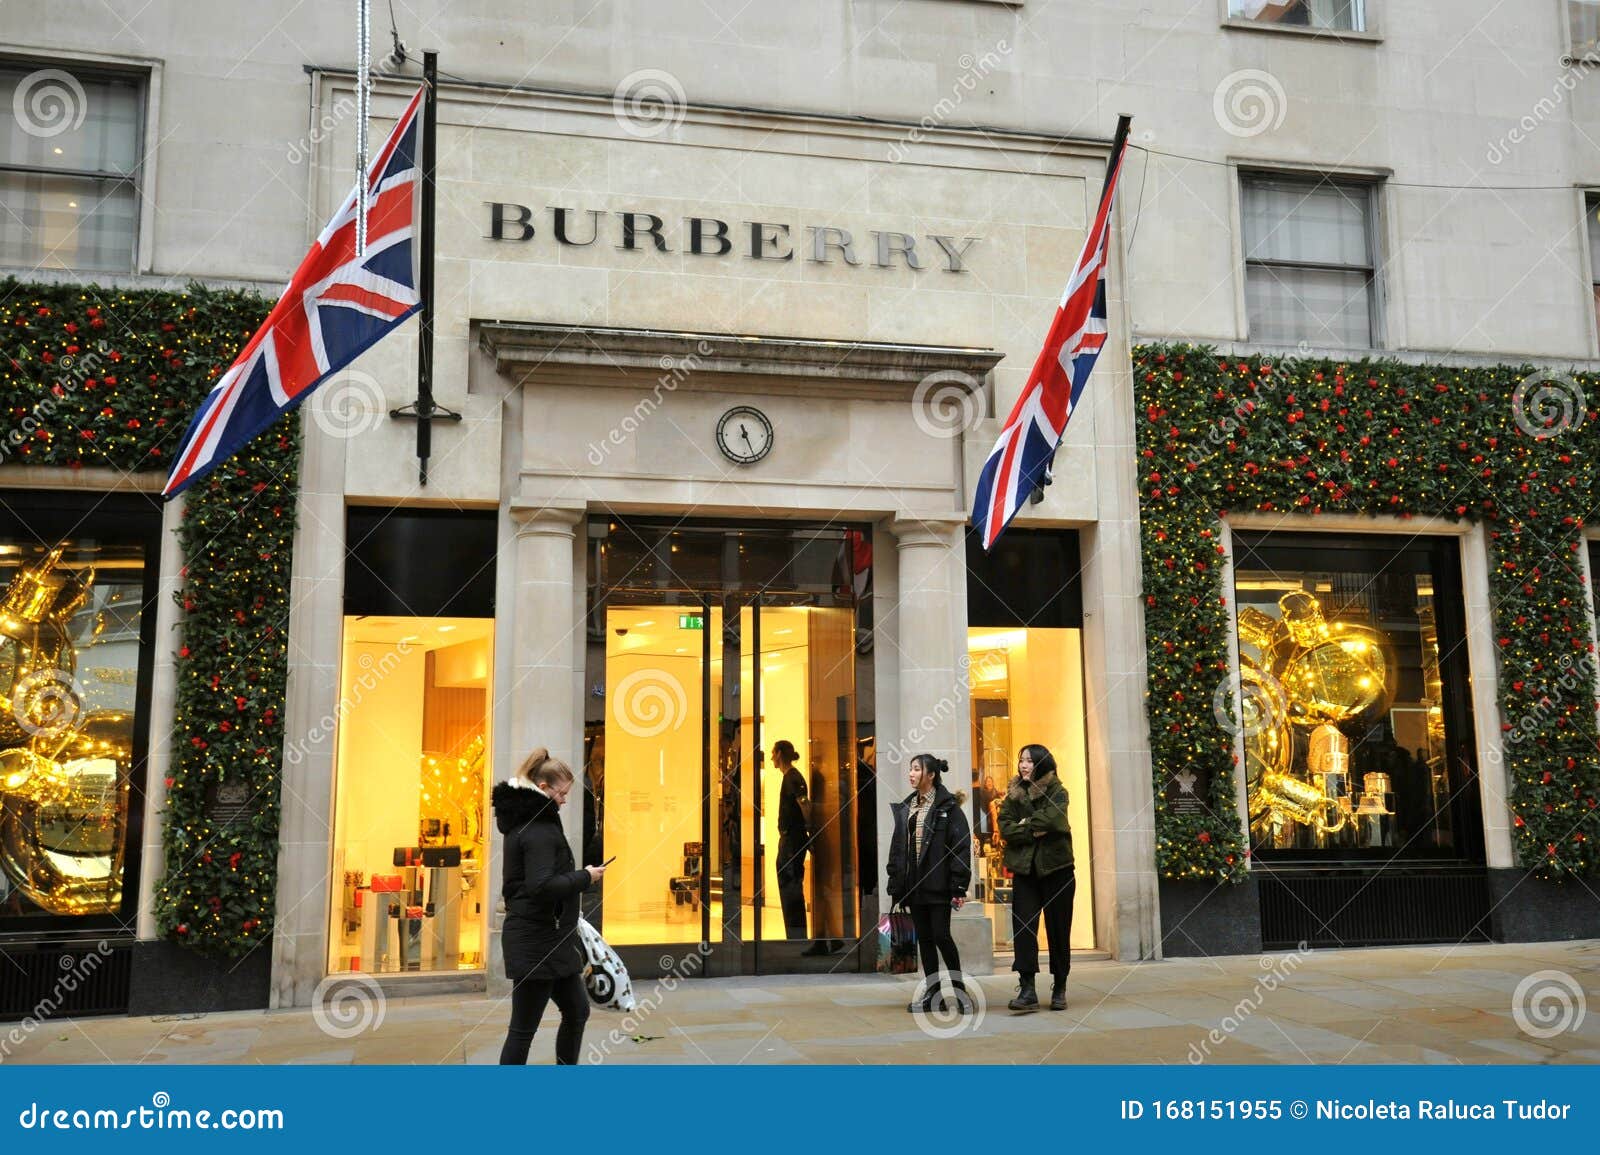 Burberry Luxury Fashion Store in London, England Editorial Image